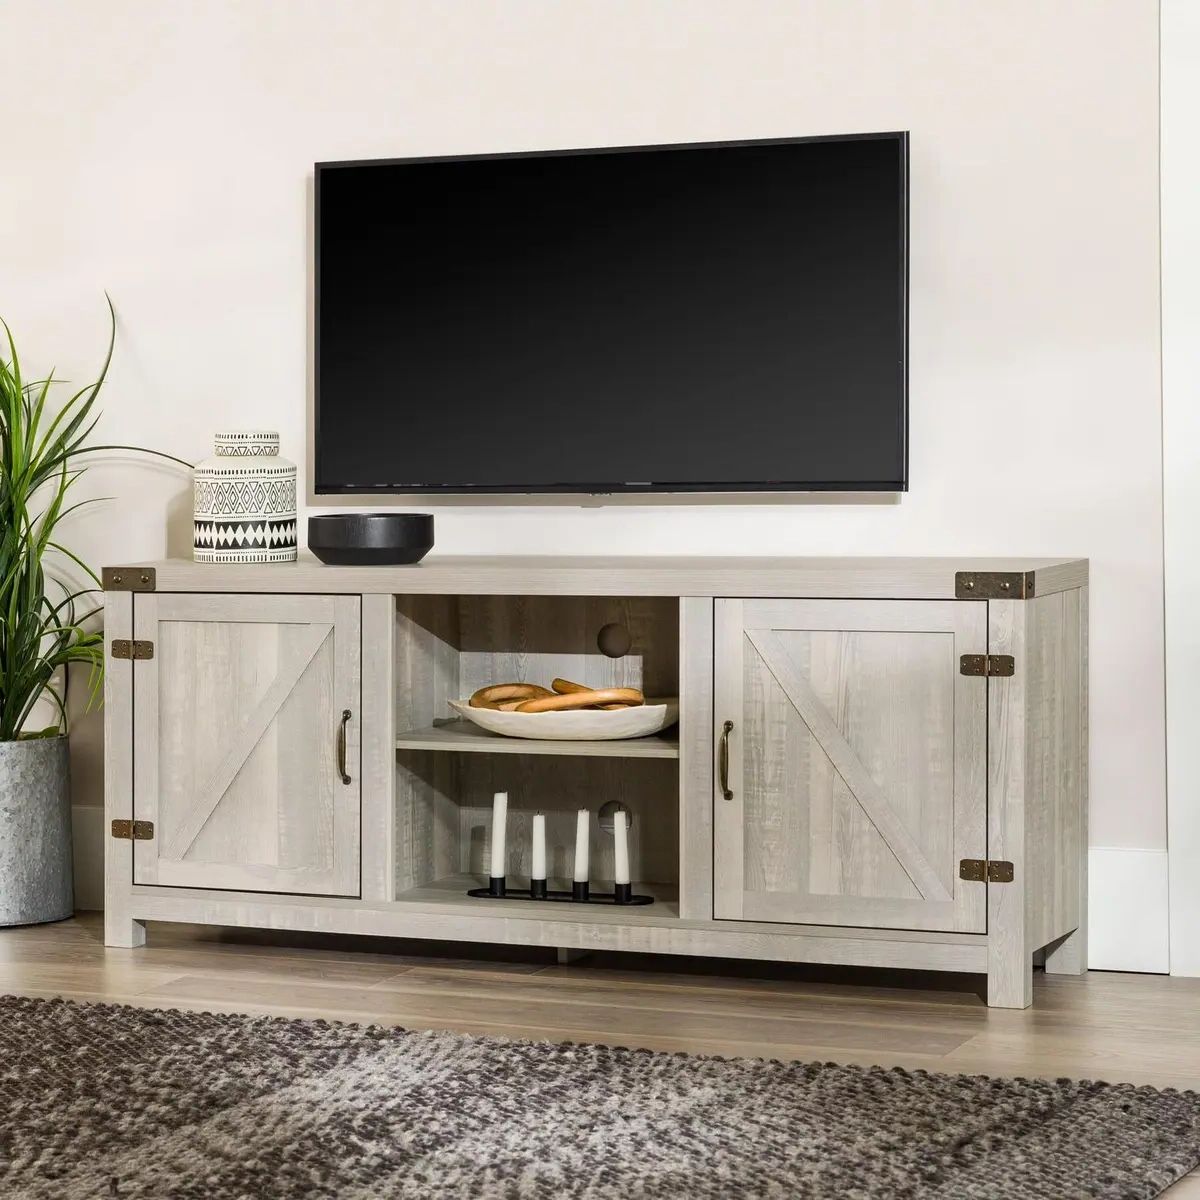 New Modern Farmhouse Barn Door Tv Stand For Tvs Up To 65 In Multiple  Finishes | Ebay Throughout Modern Farmhouse Barn Tv Stands (View 10 of 20)